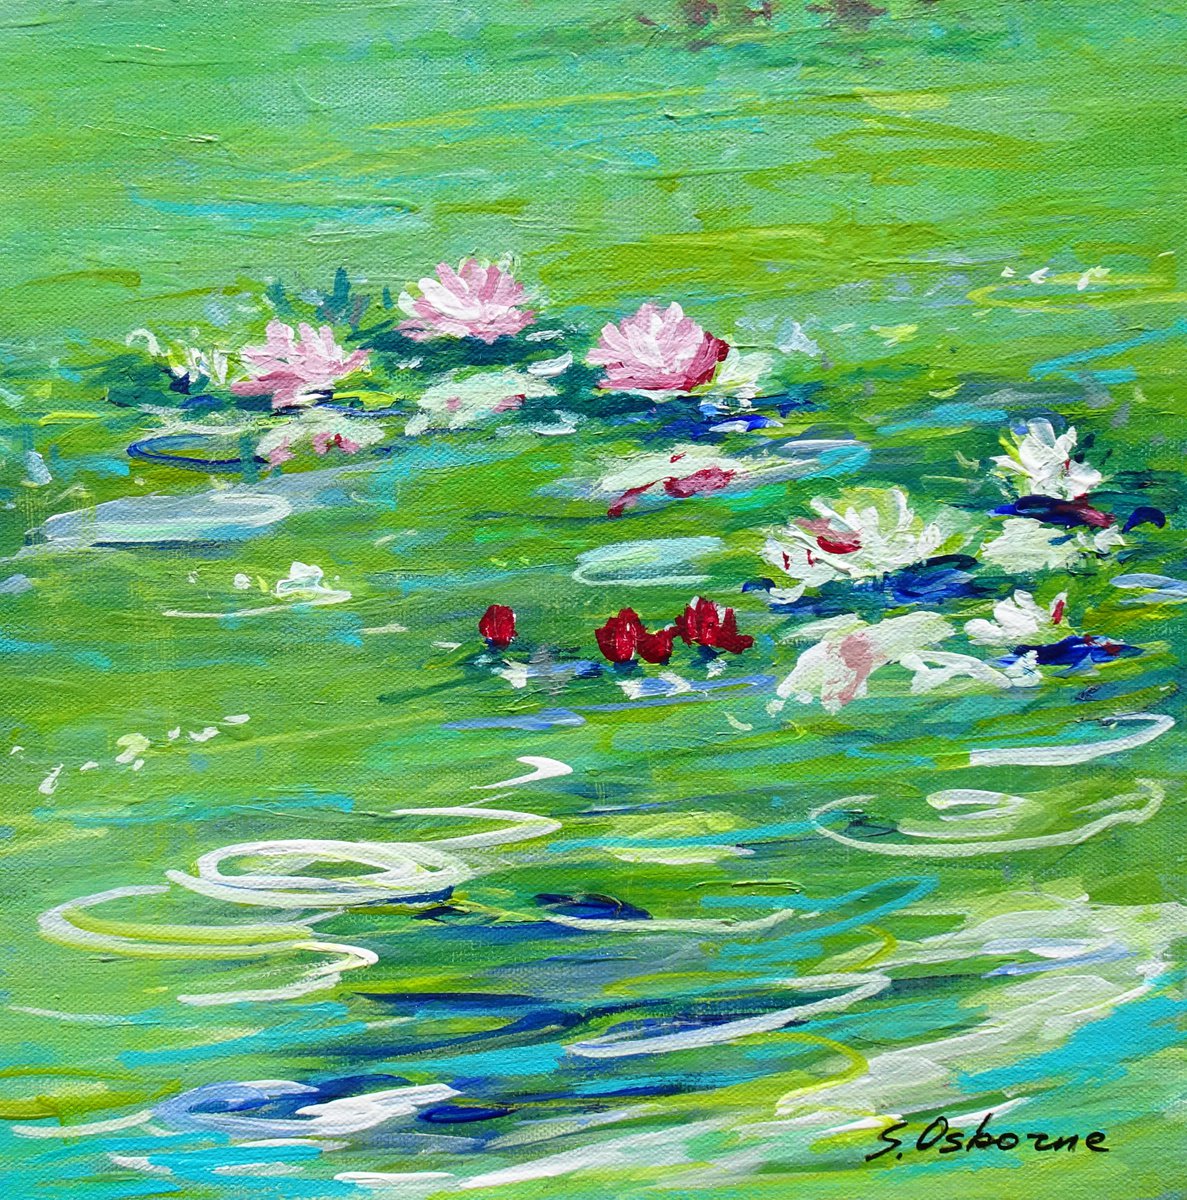 Water Lily Pond Small Floral Painting. Green Painting on Canvas. Modern Impressionism Art by Sveta Osborne